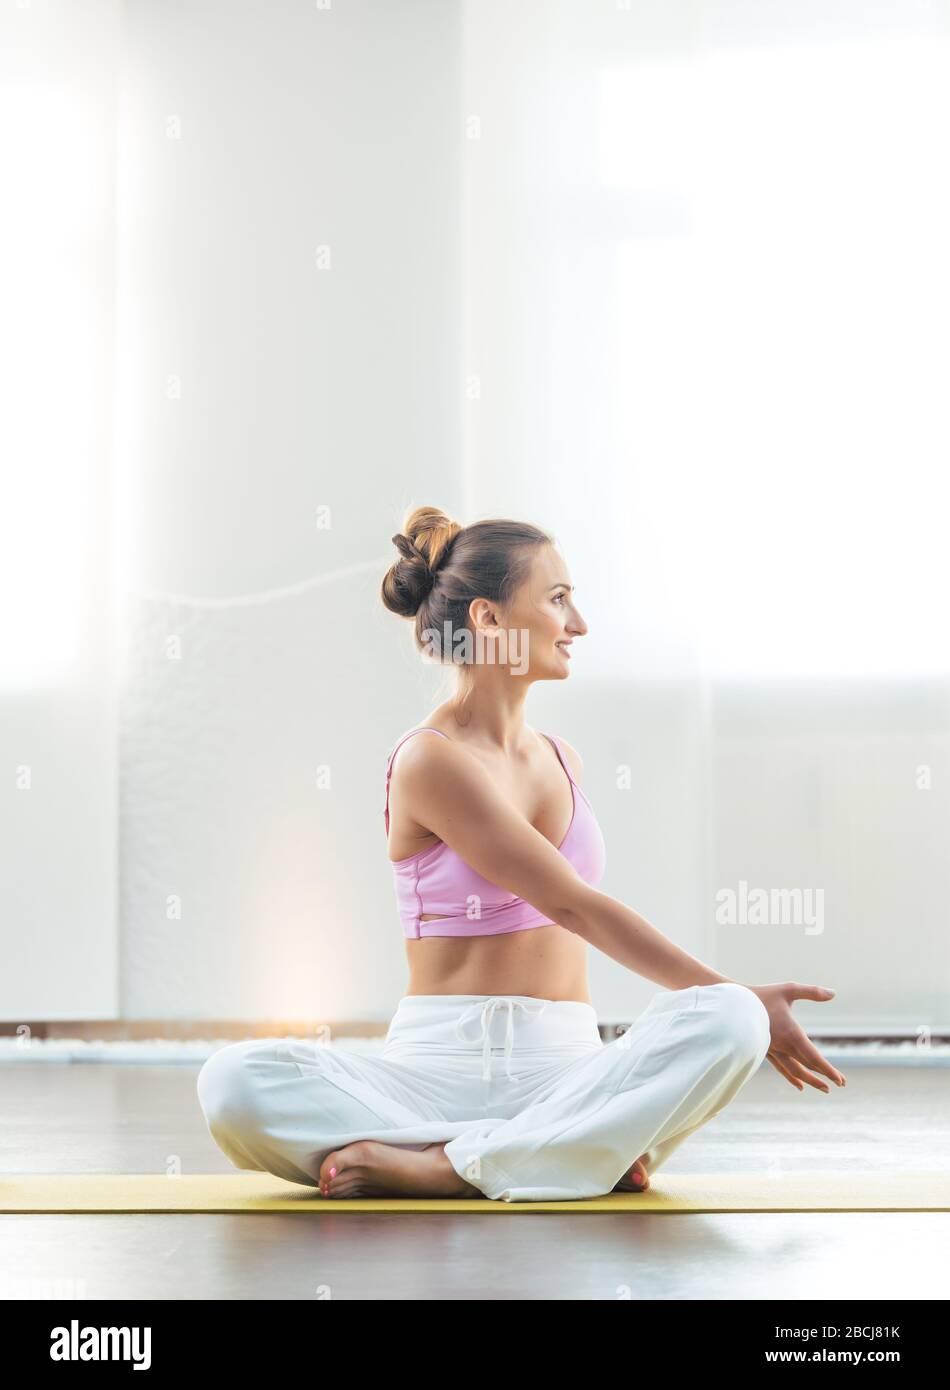 Yoga instructor showing poses in her class Stock Photo